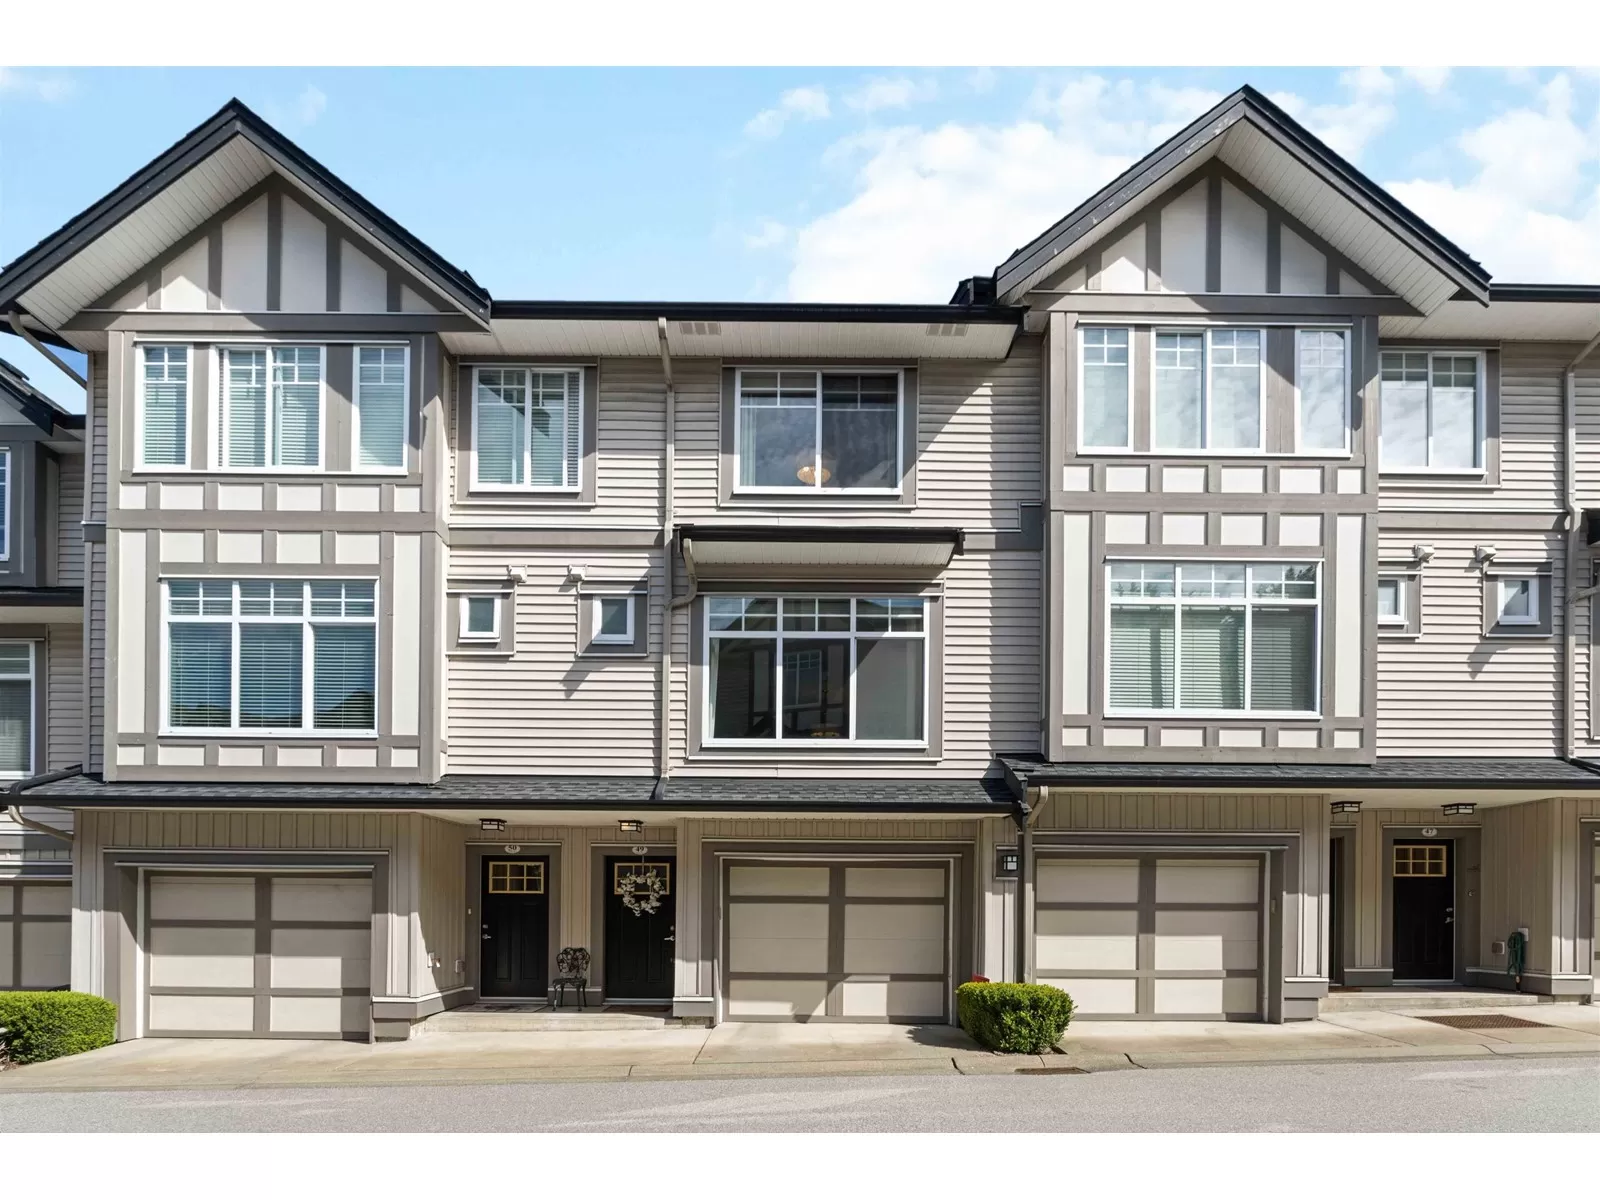 Row / Townhouse for rent: 49 7090 180 Street, Surrey, British Columbia V3S 3T9